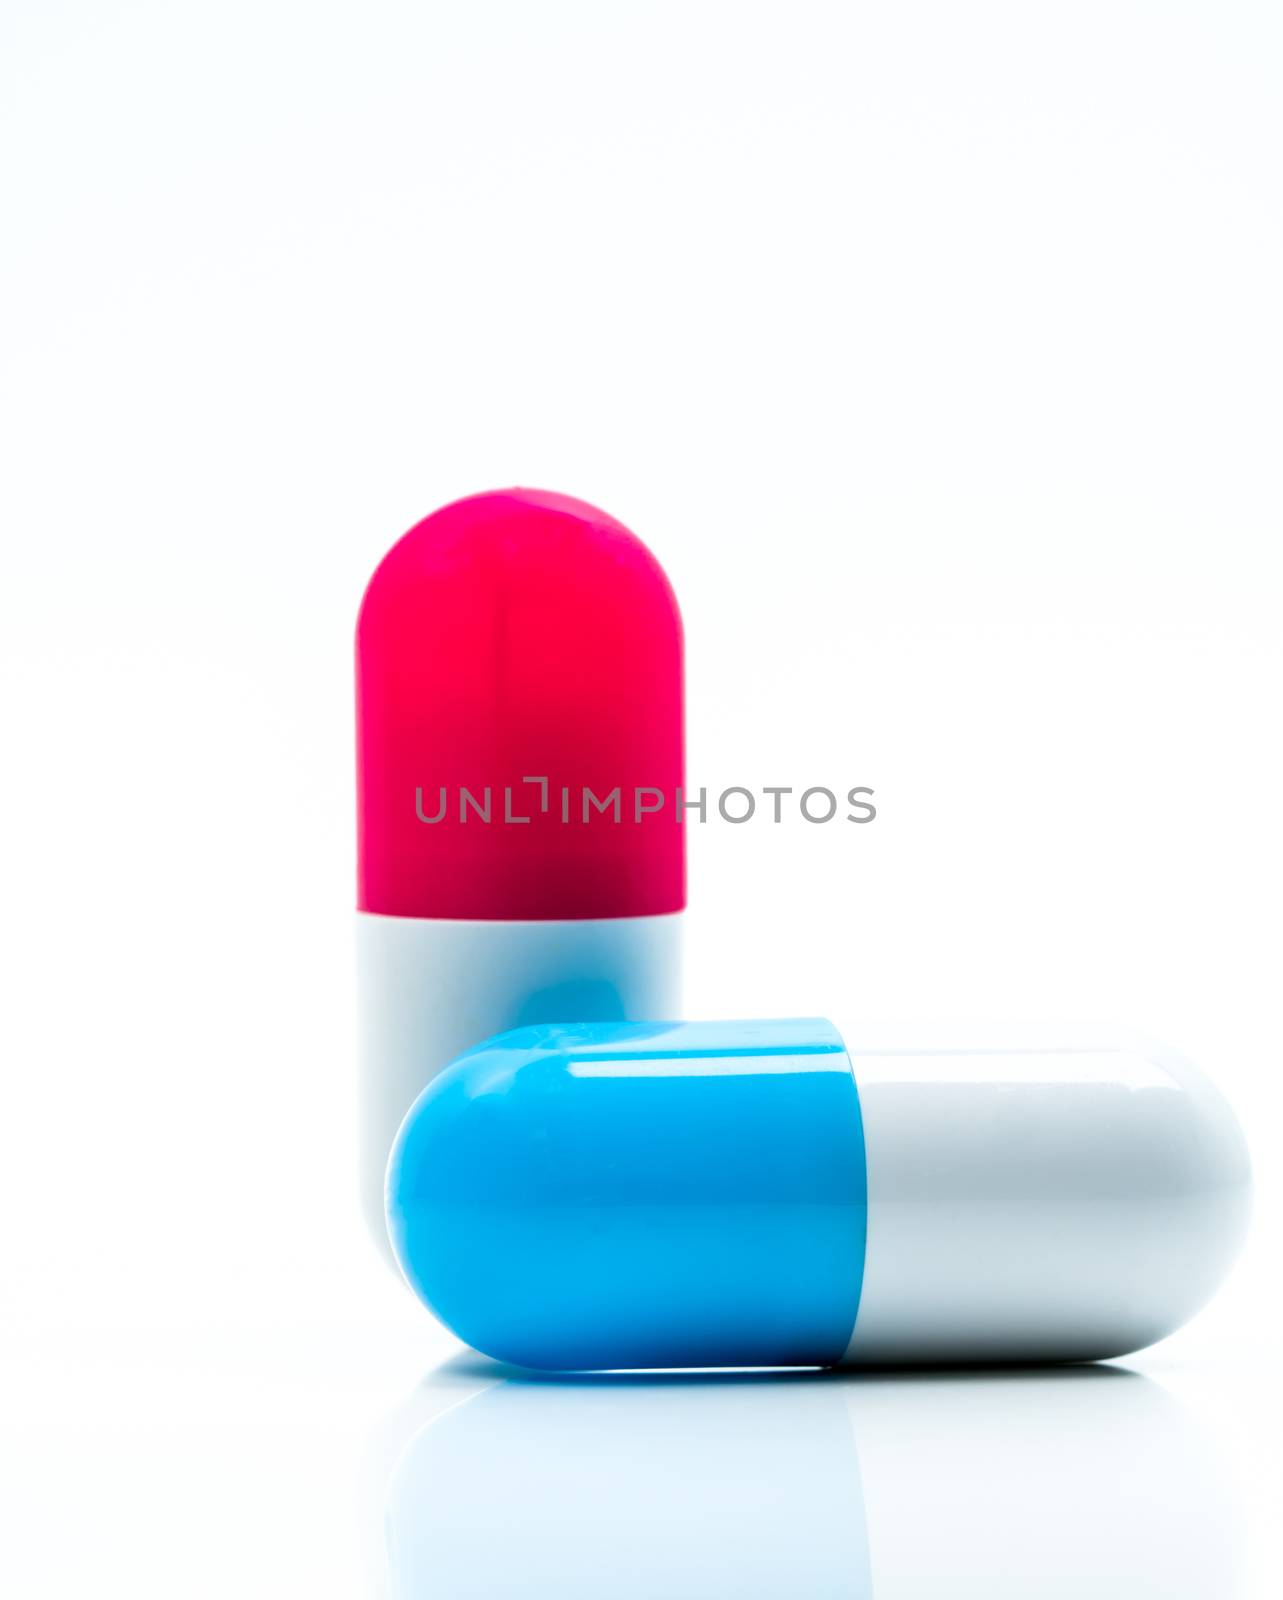 Two capsule pills isolated on white background. Global healthcare concept. Pharmacy sign and symbol. Pharmaceutical industry. Pharmacy background. Global healthcare concept. Antibiotic or antimicrobial drug resistance. Health budgets and policy. Blue-white and red-white antibiotic capsule.